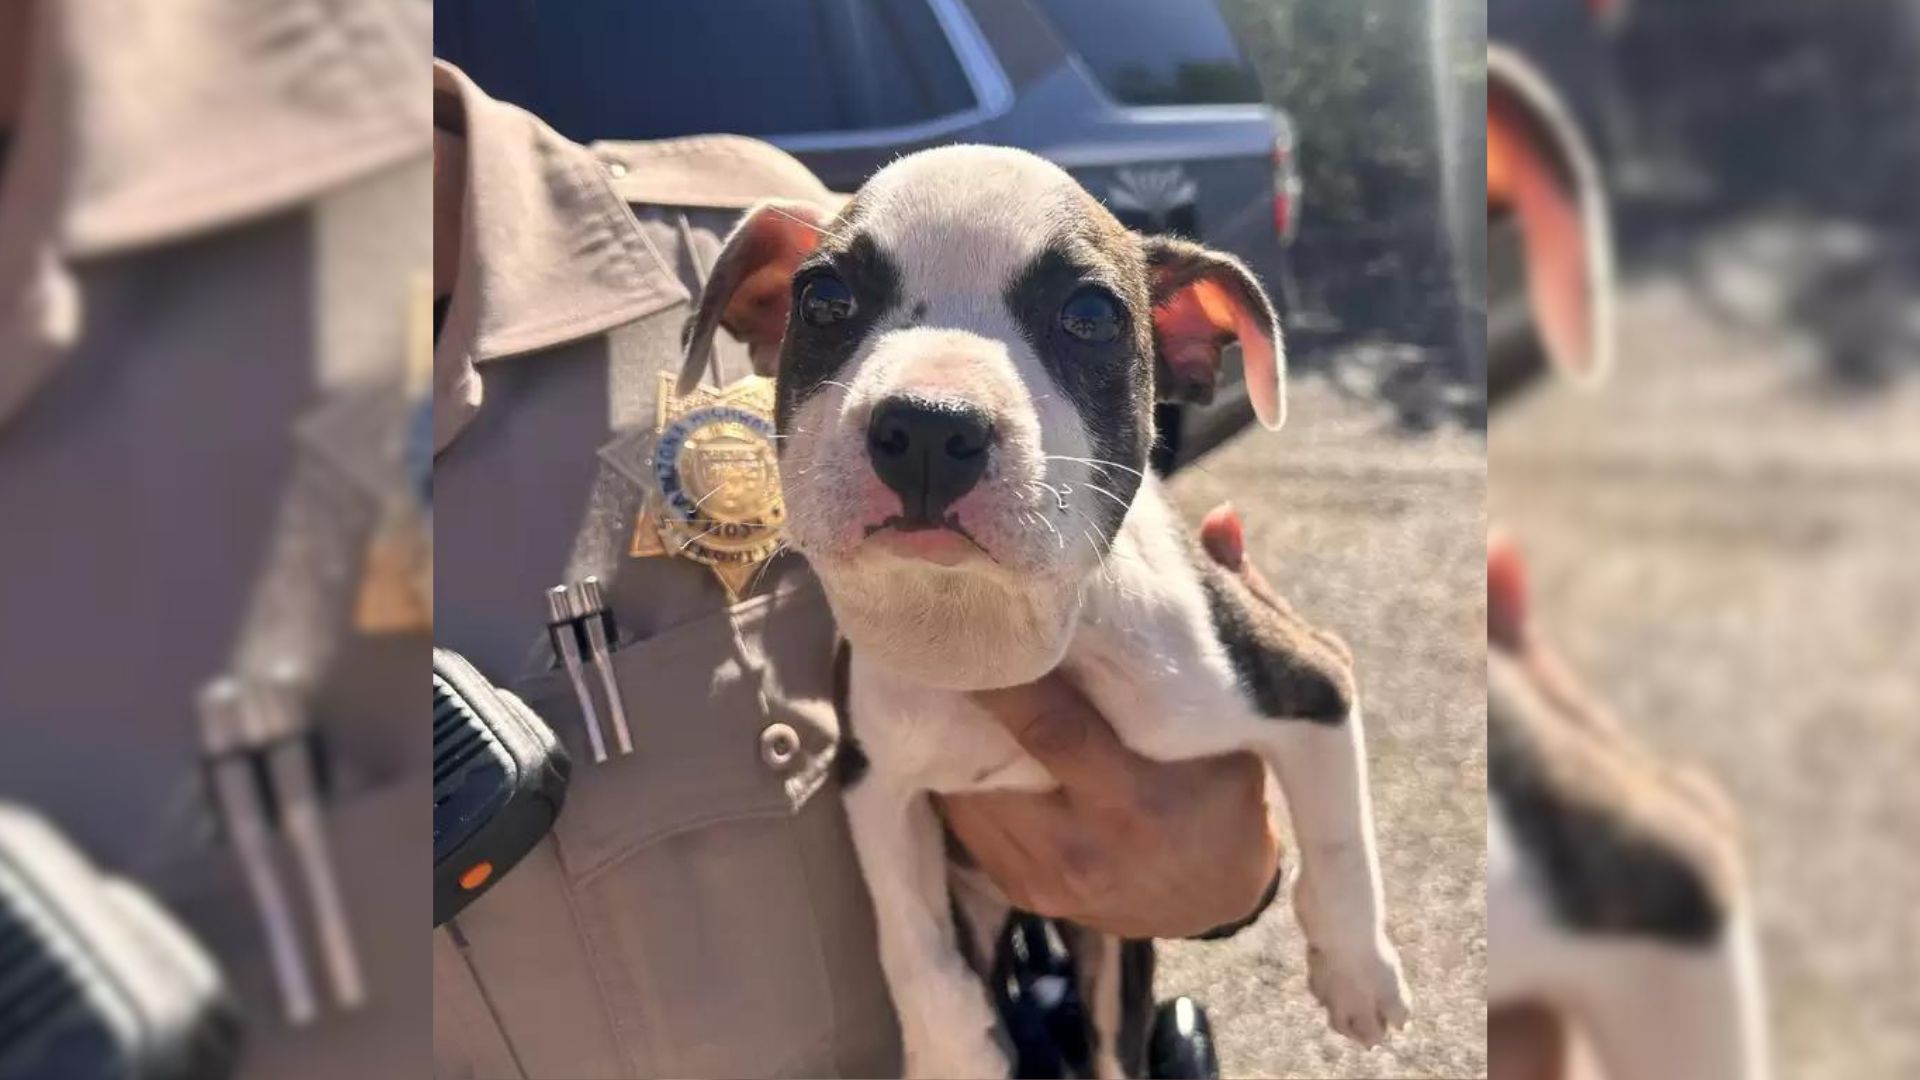 Truck Driver Notices A Sweet Puppy On Highway With Something Unusual Wrapped Around Her Neck